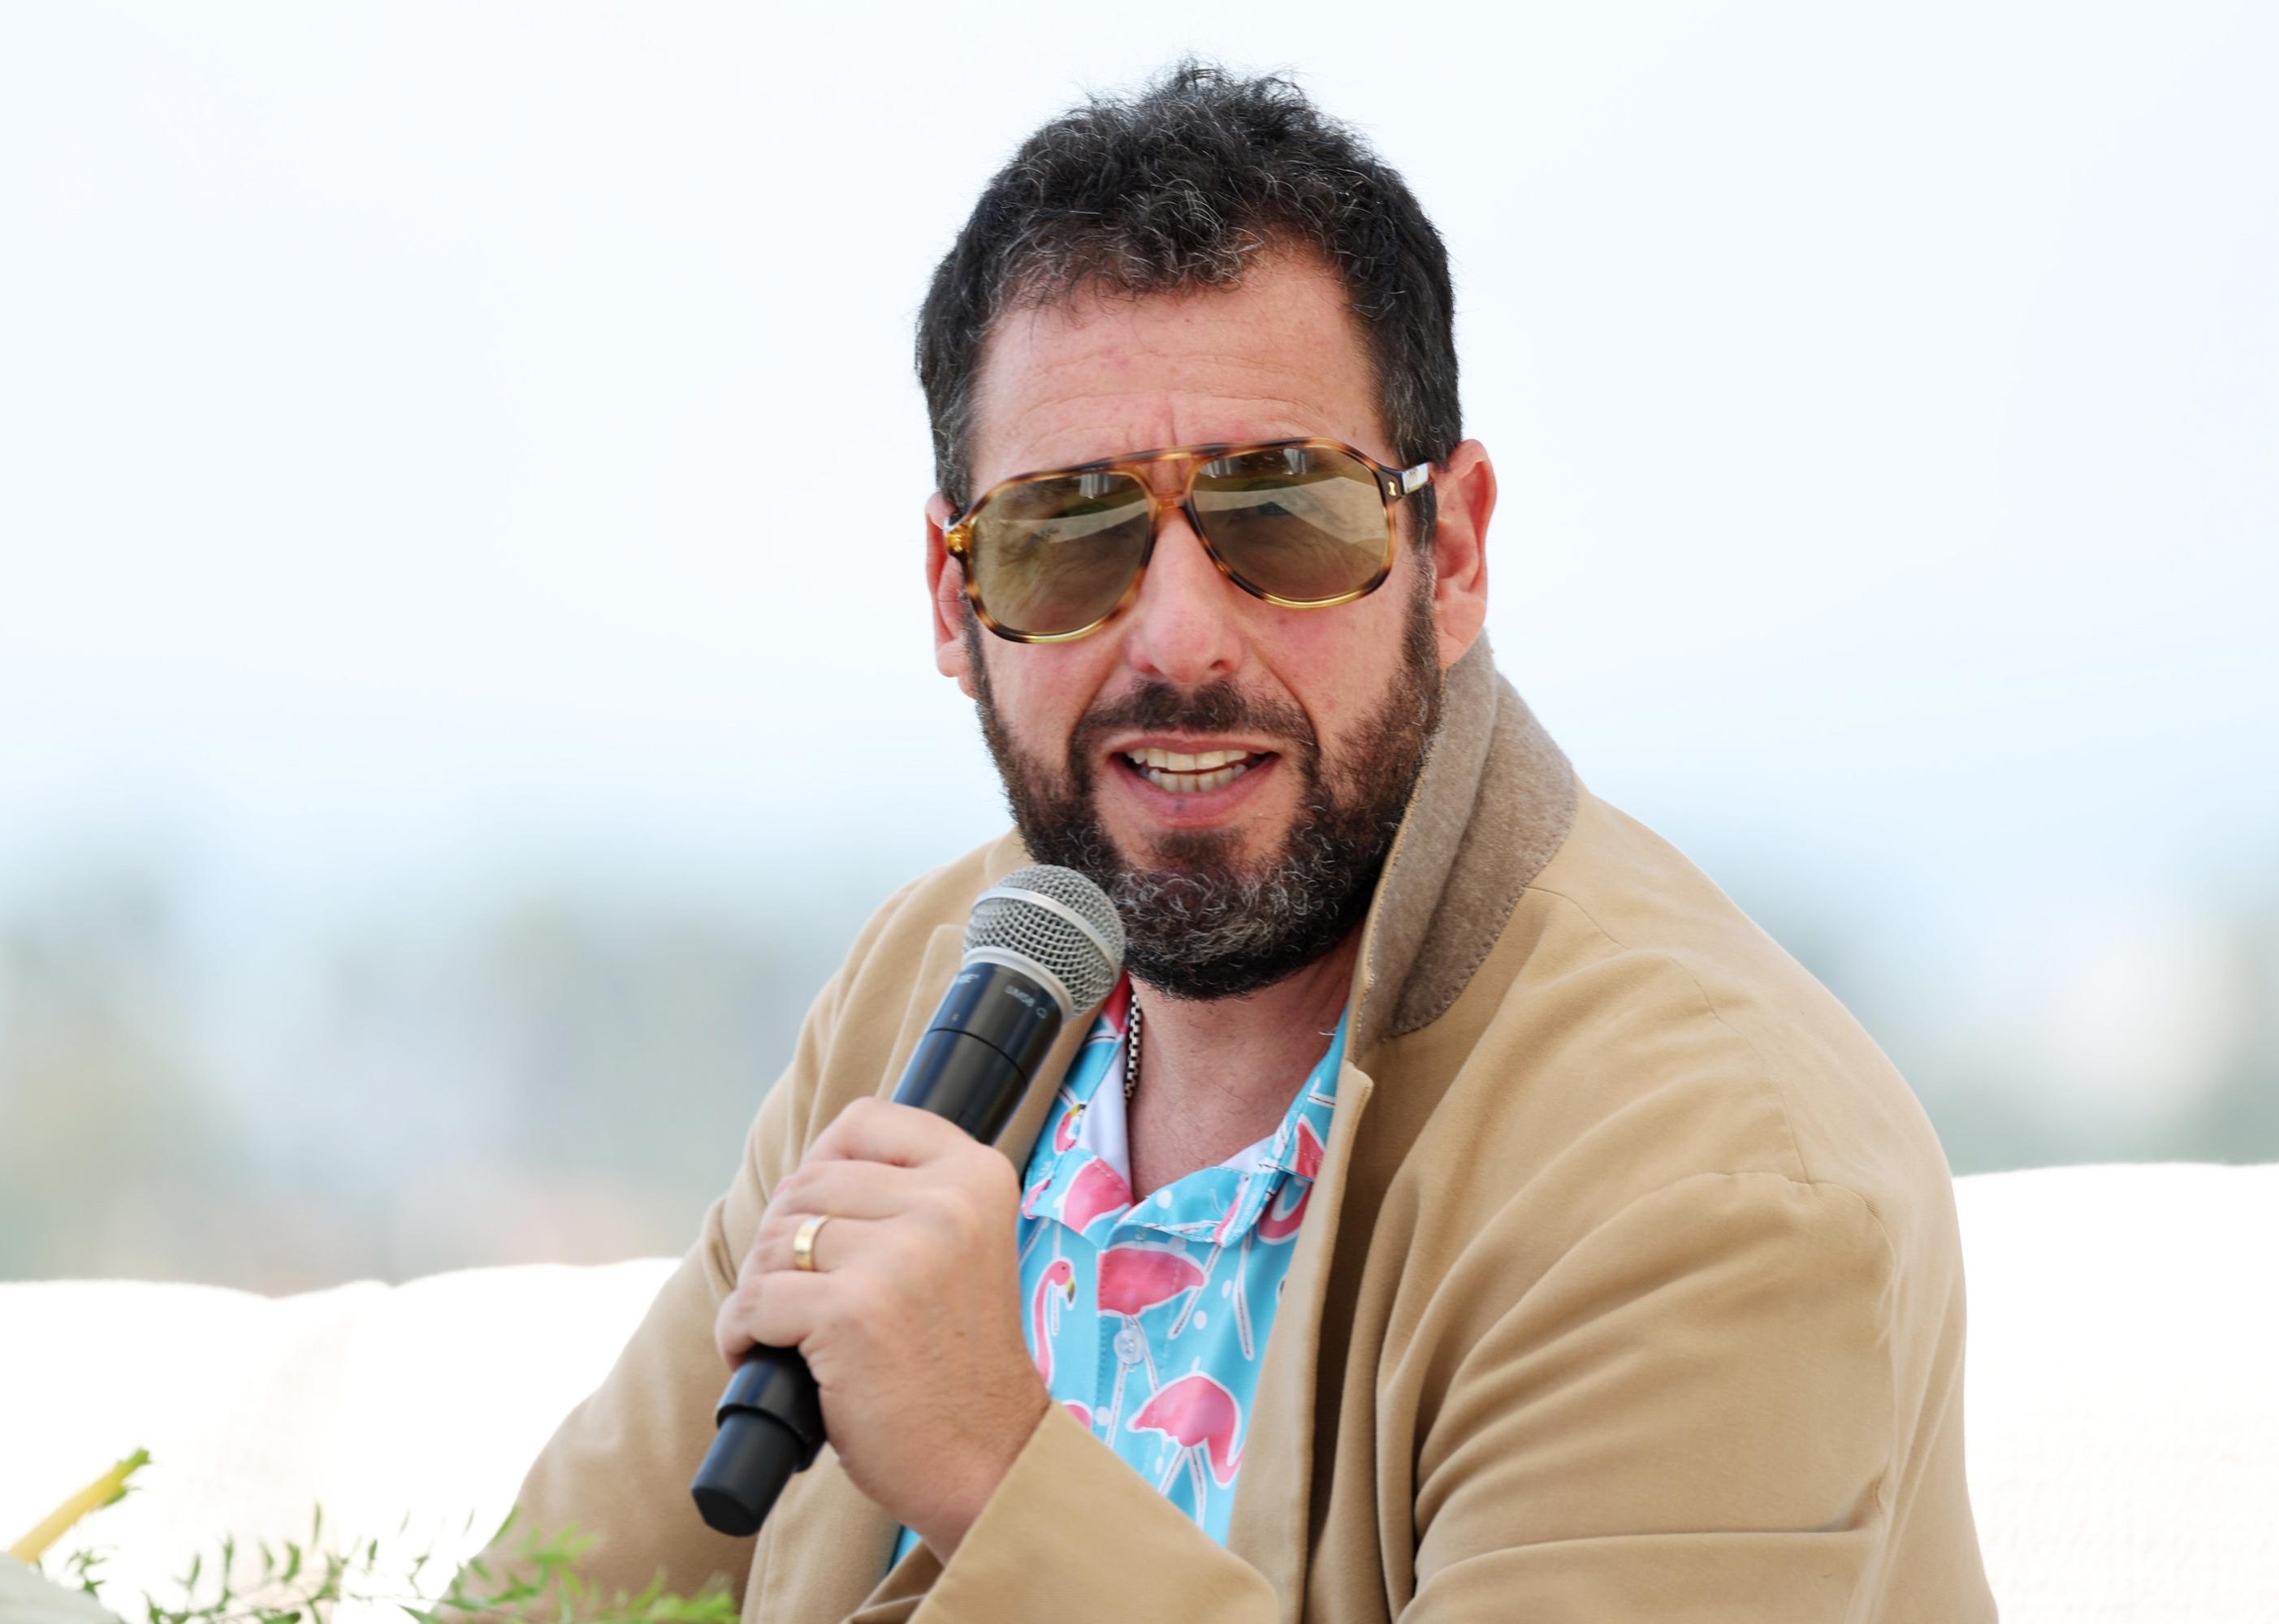 Adam Sandler in a flamingo shirt and sunglasses with a microphone.